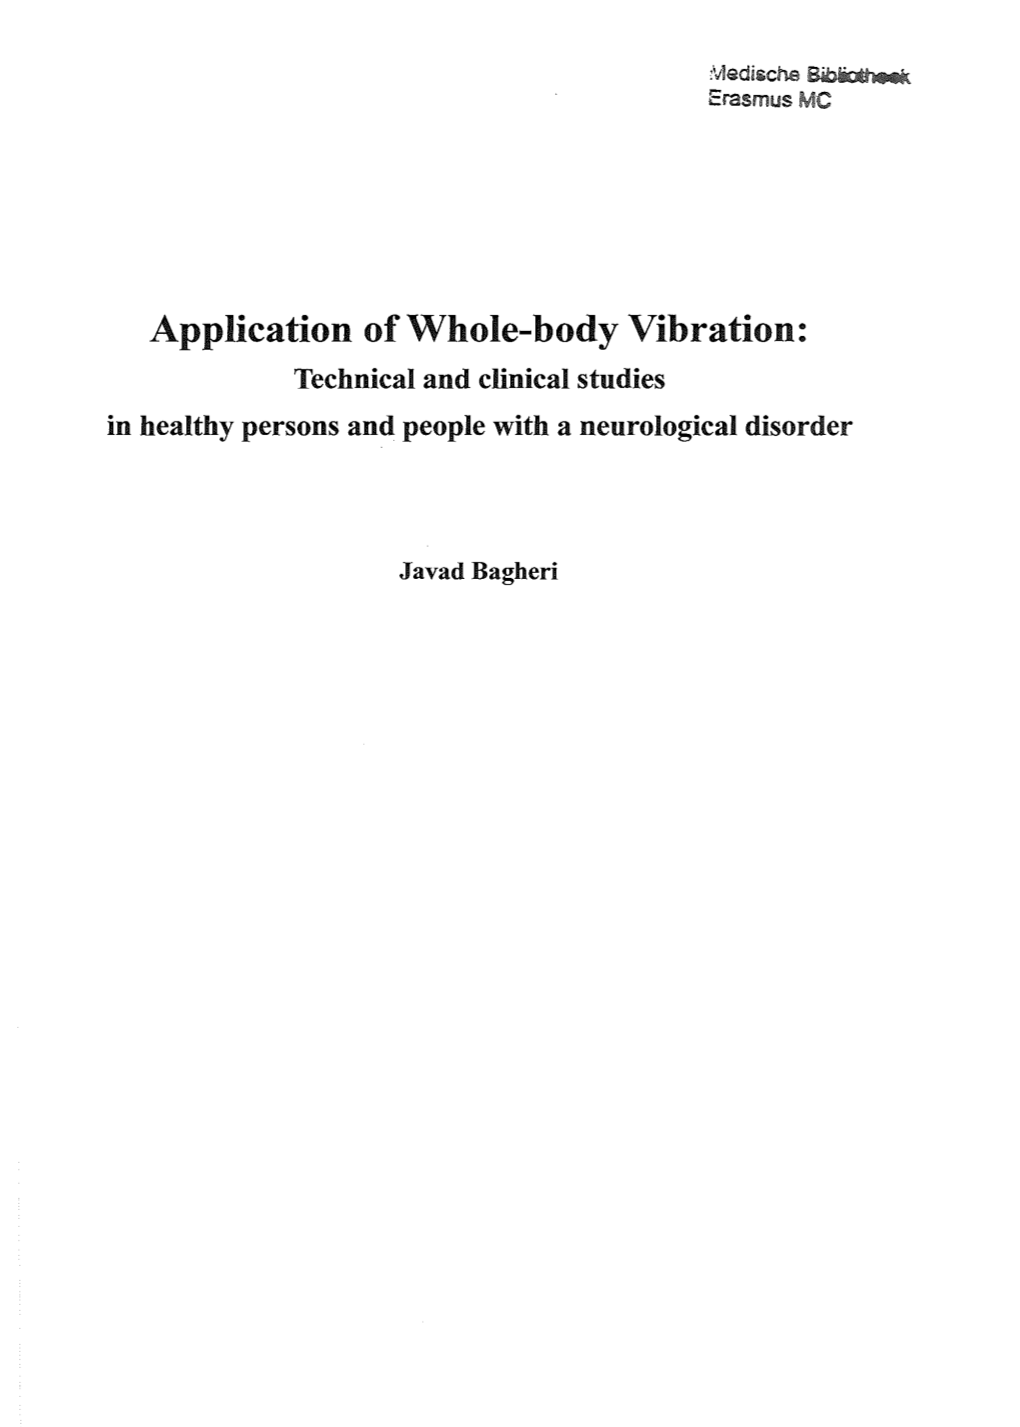 Application of Whole-Body Vibration: Technical and Clinical Studies in Healthy Persons and People with a Neurological Disorder